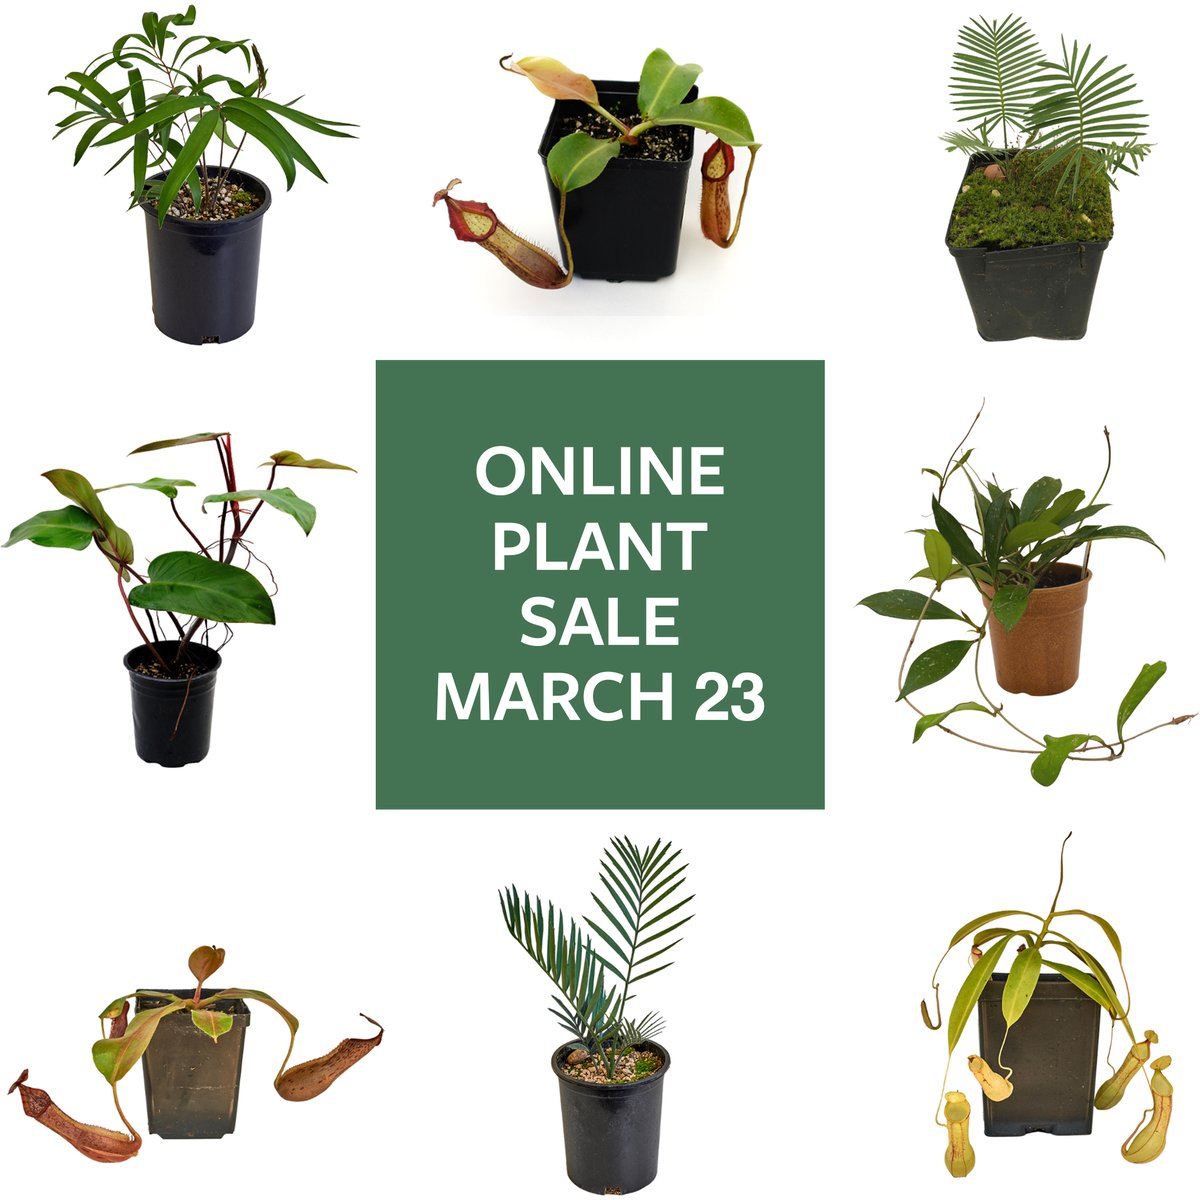 Uncommon Collectibles! Get ready for our online plant sale this Saturday, March 23, starting at 8:00 am! Find shopping details and plant list on our website: ow.ly/9pP650QW8Ve. Sale lasts through March 24, or while supplies last.